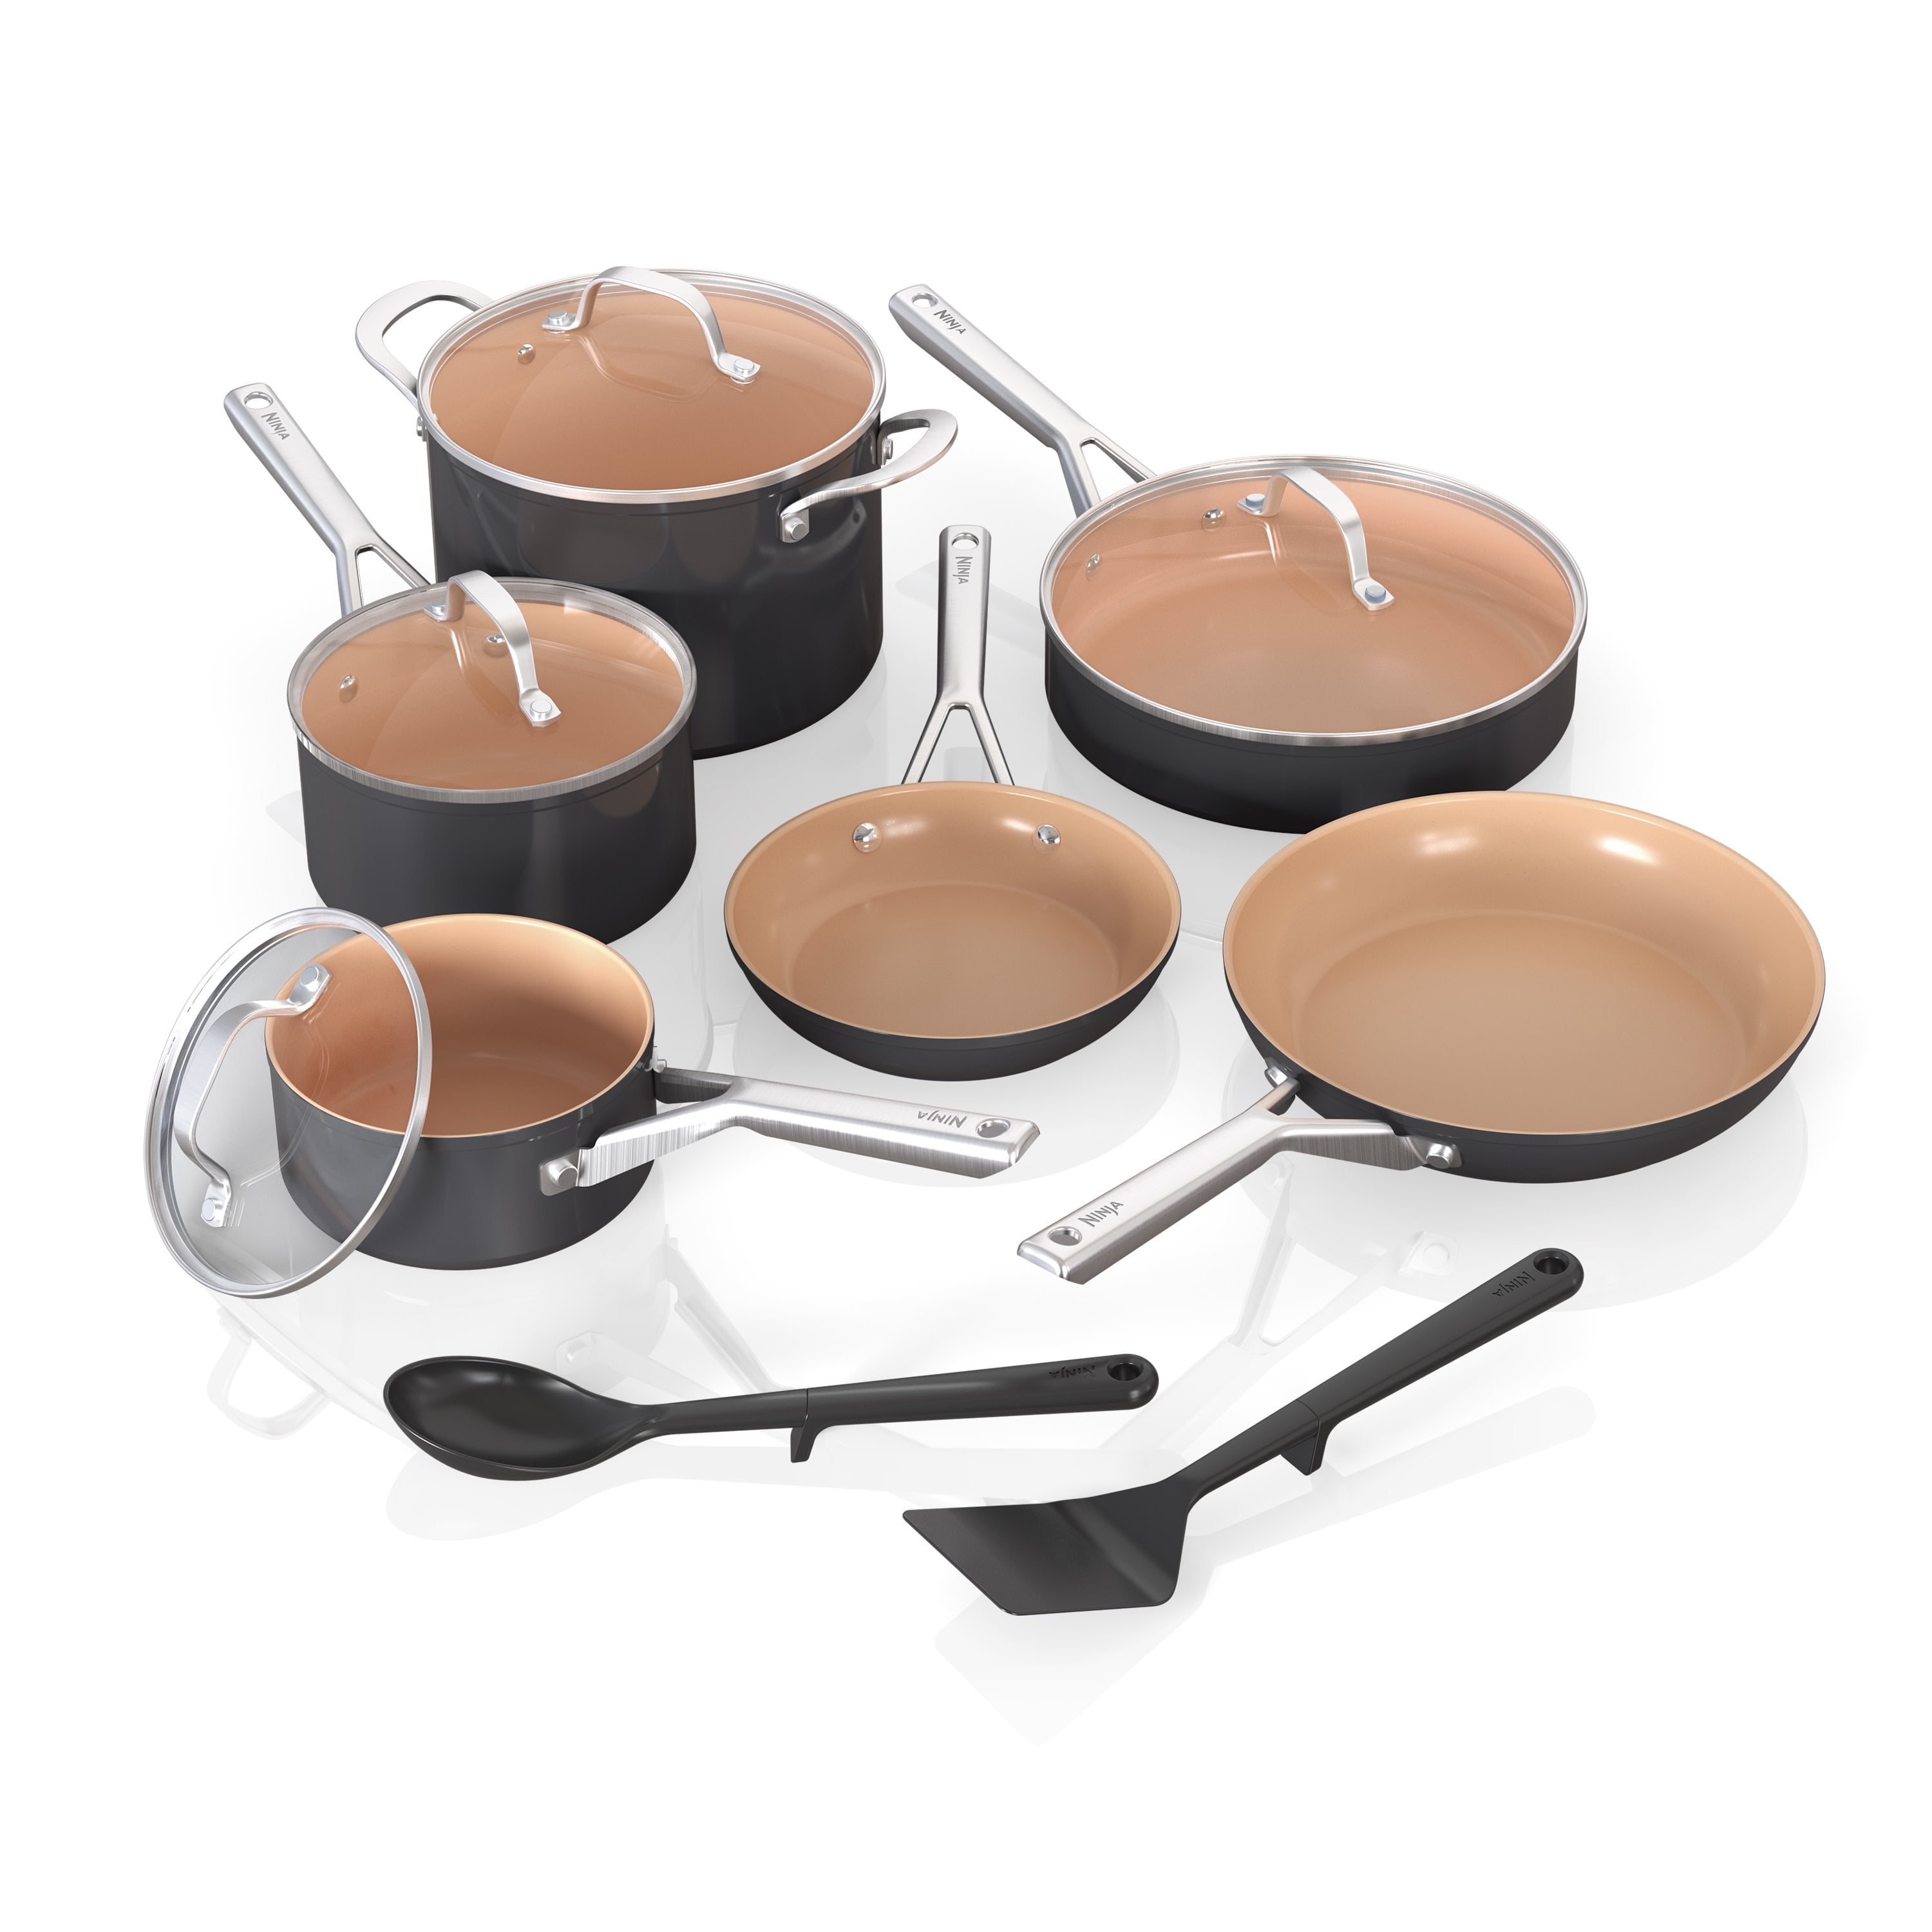 12-Piece Ninja Extended Life Essential Ceramic Cookware Set $109 + Free Shipping